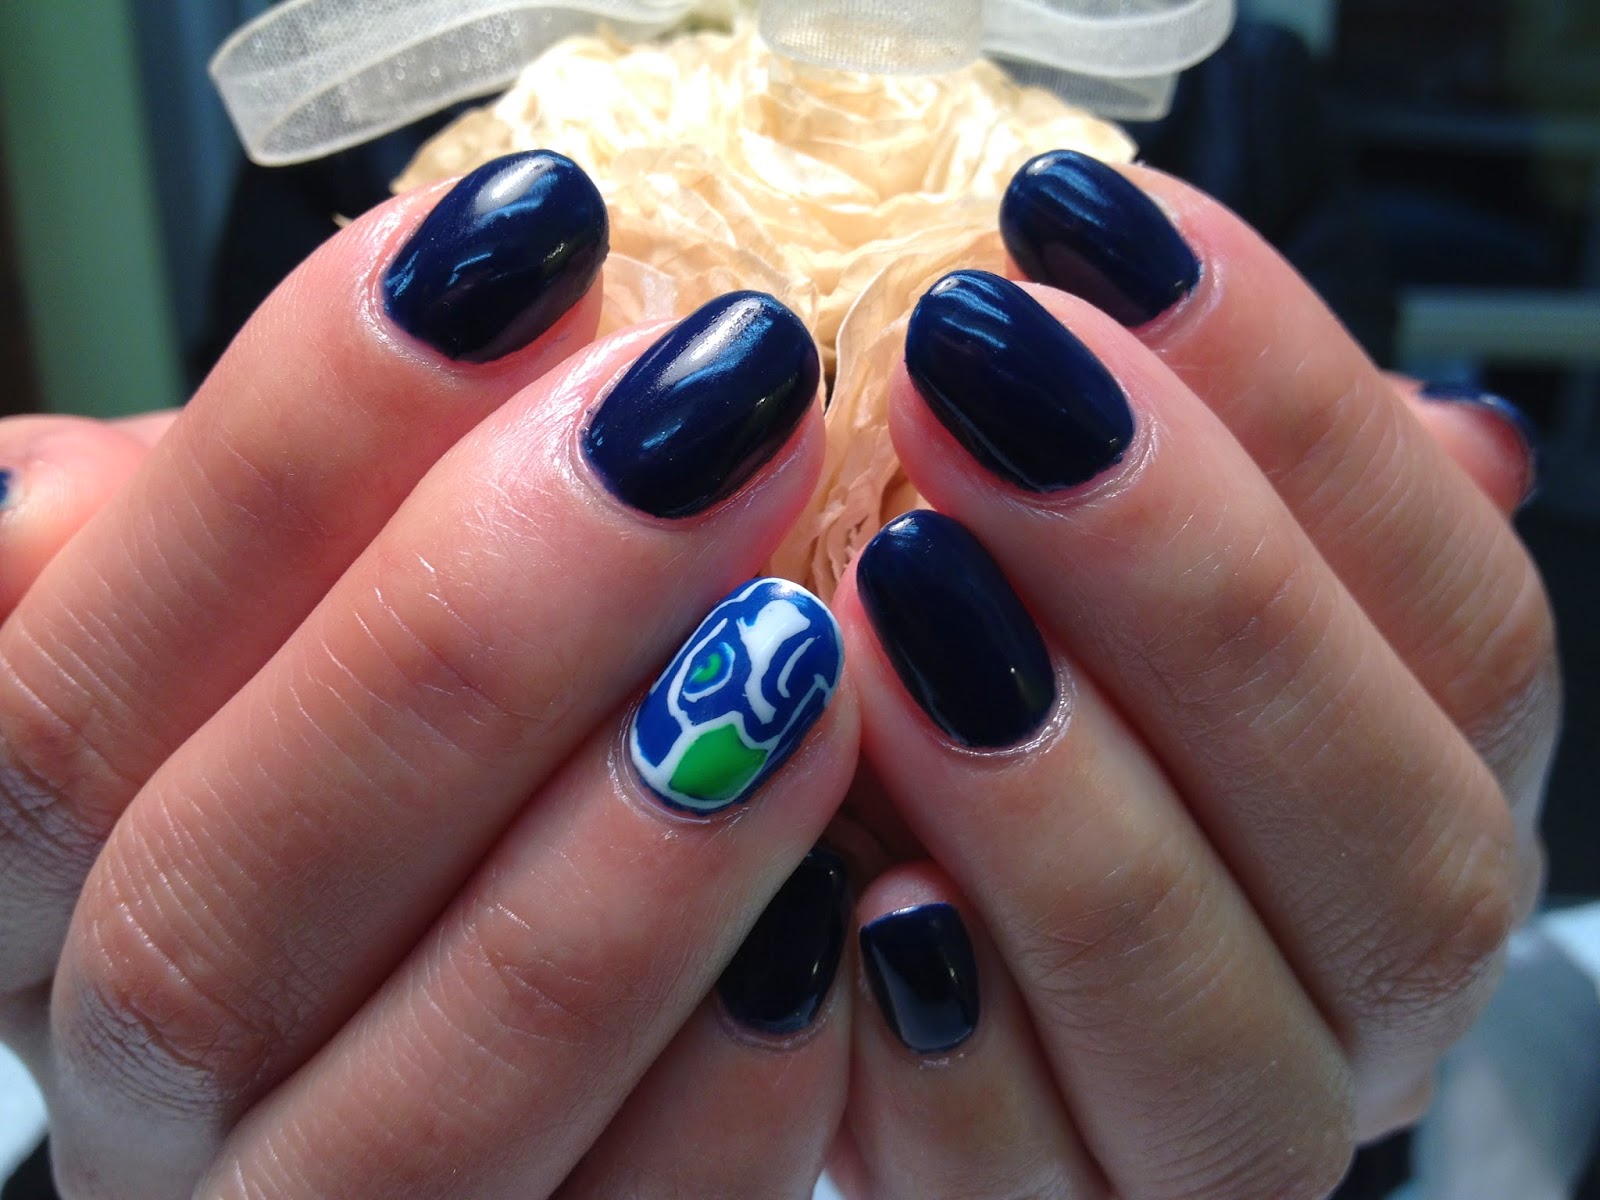 2. Seattle Seahawks Nail Designs for Super Bowl - wide 8